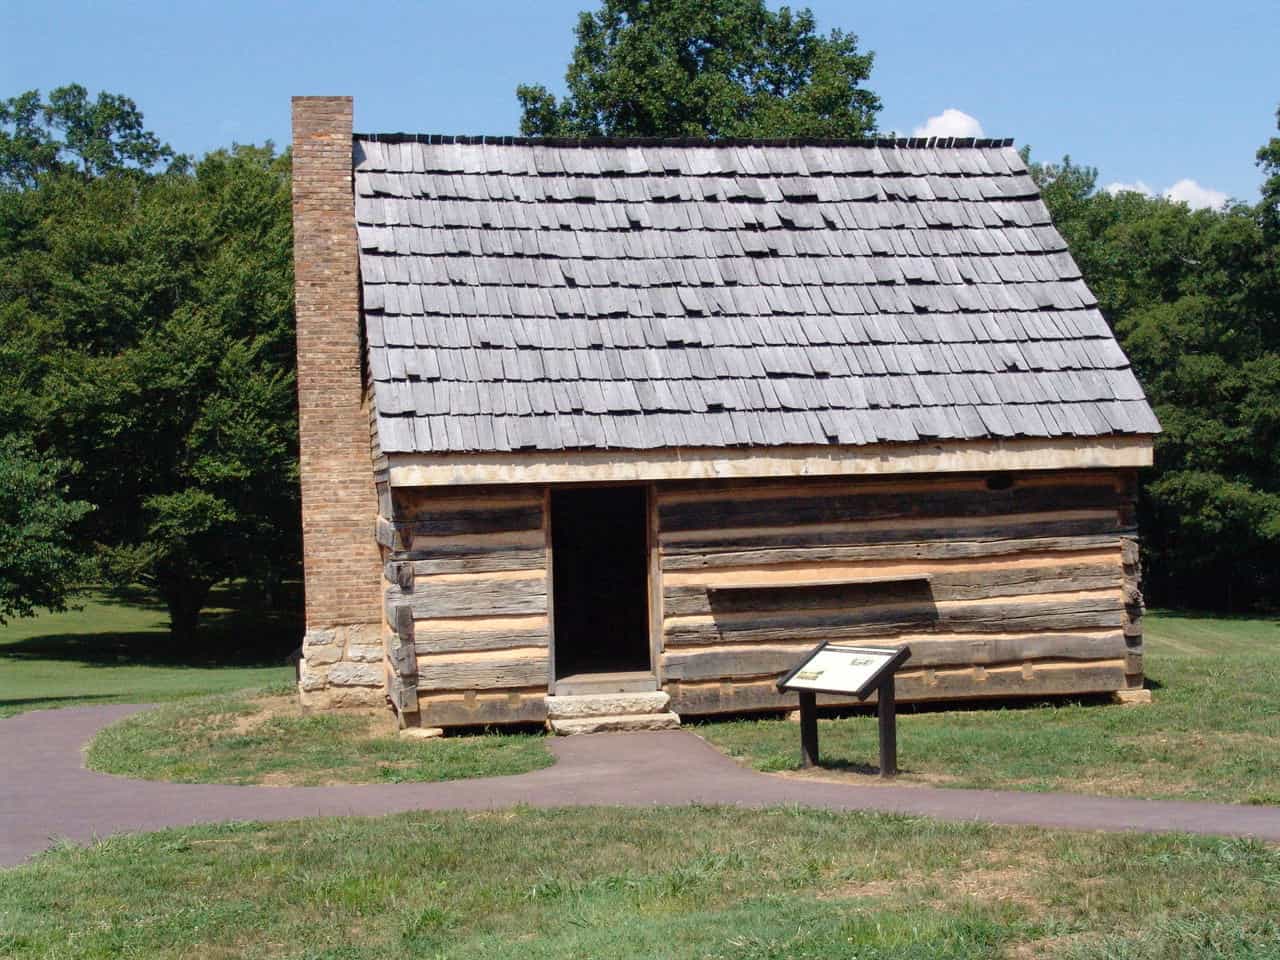 Slave cabin at The Hermitage in Nashville, Tennessee